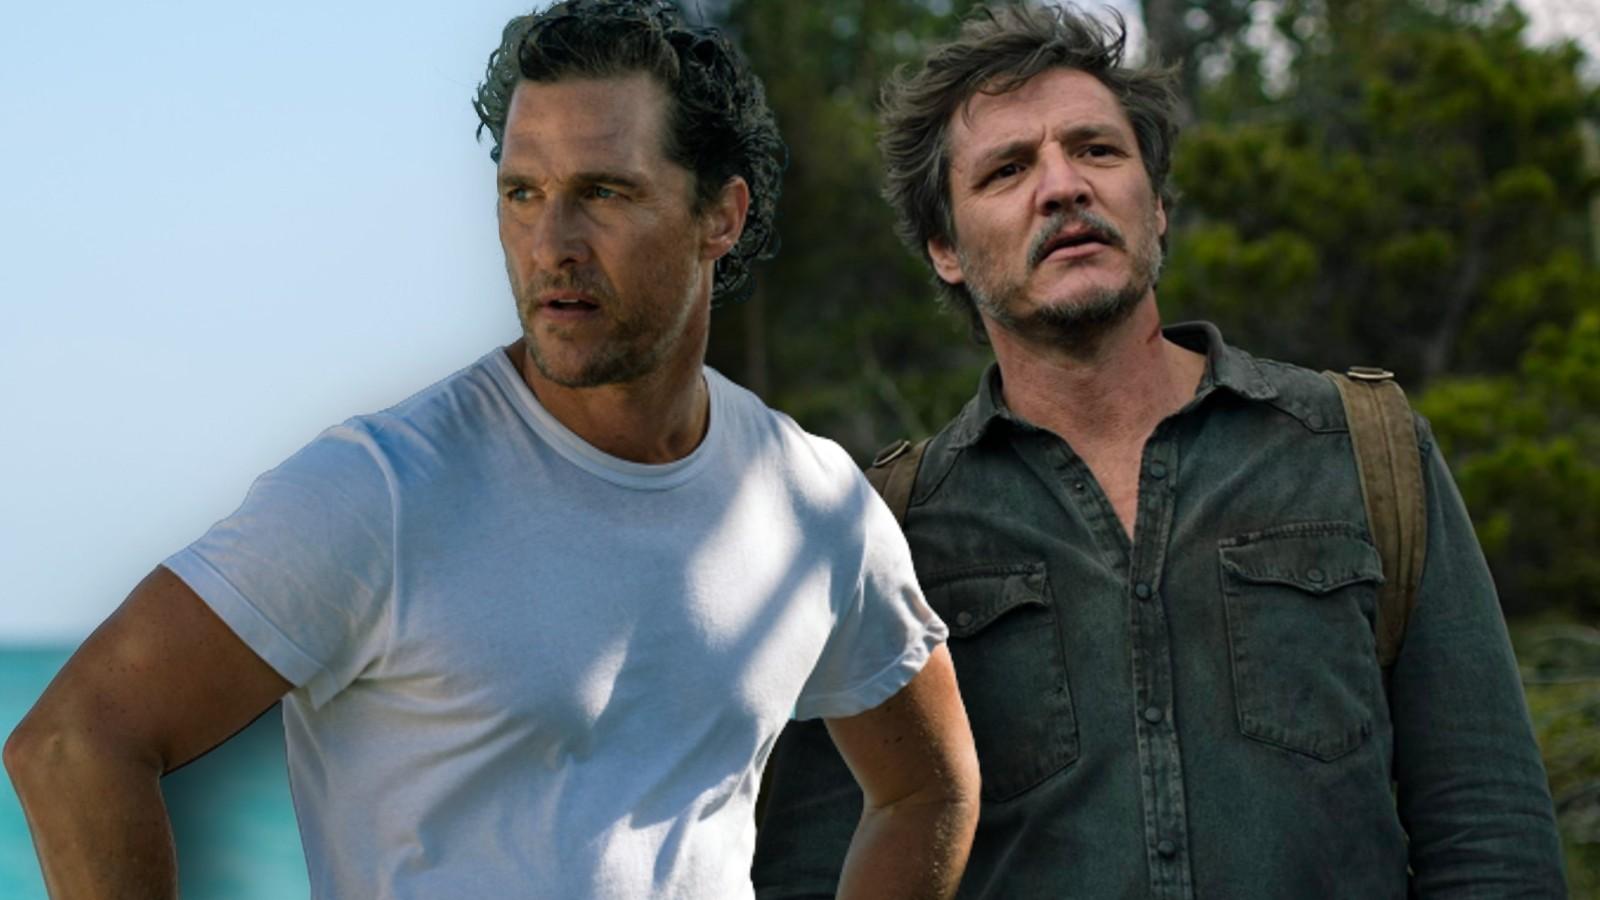 Matthew McConaughey Was Tapped to Play Joel in 'The Last of Us